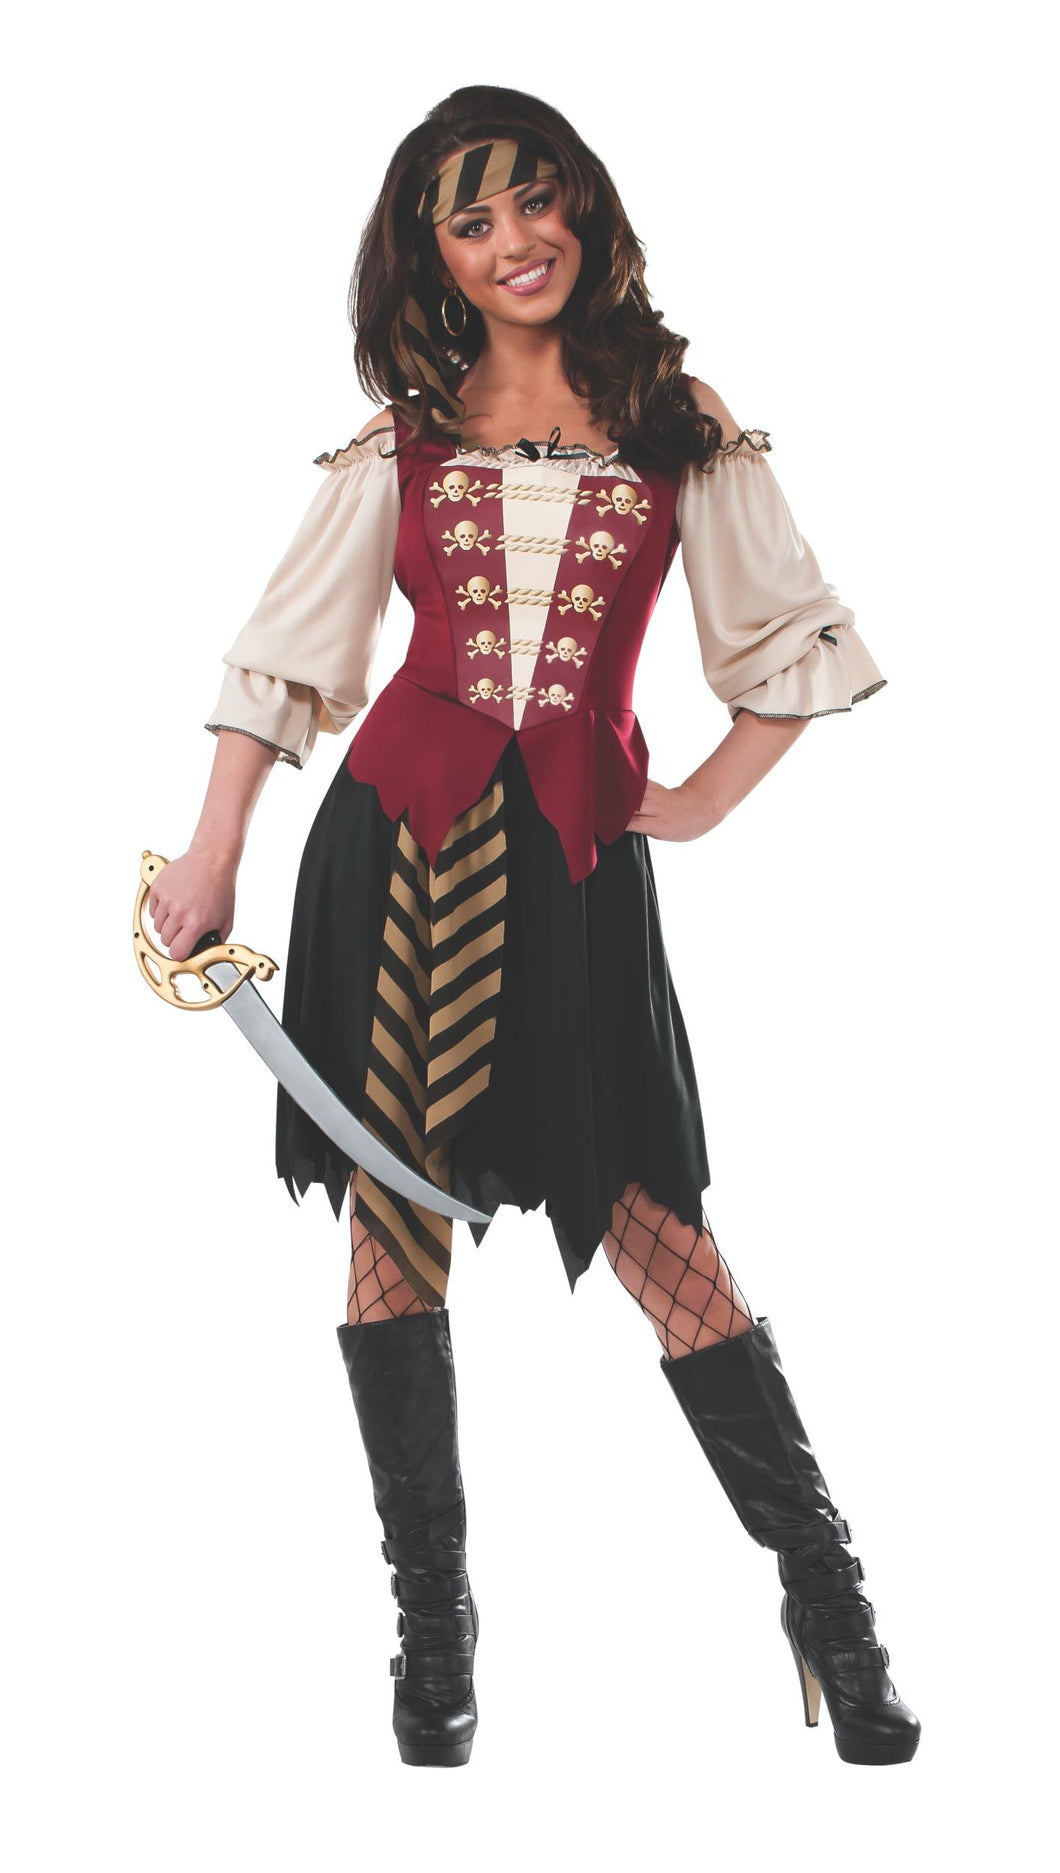 Elegant Pirate Cute Deck Hand Adult Costume Size Small 2-6